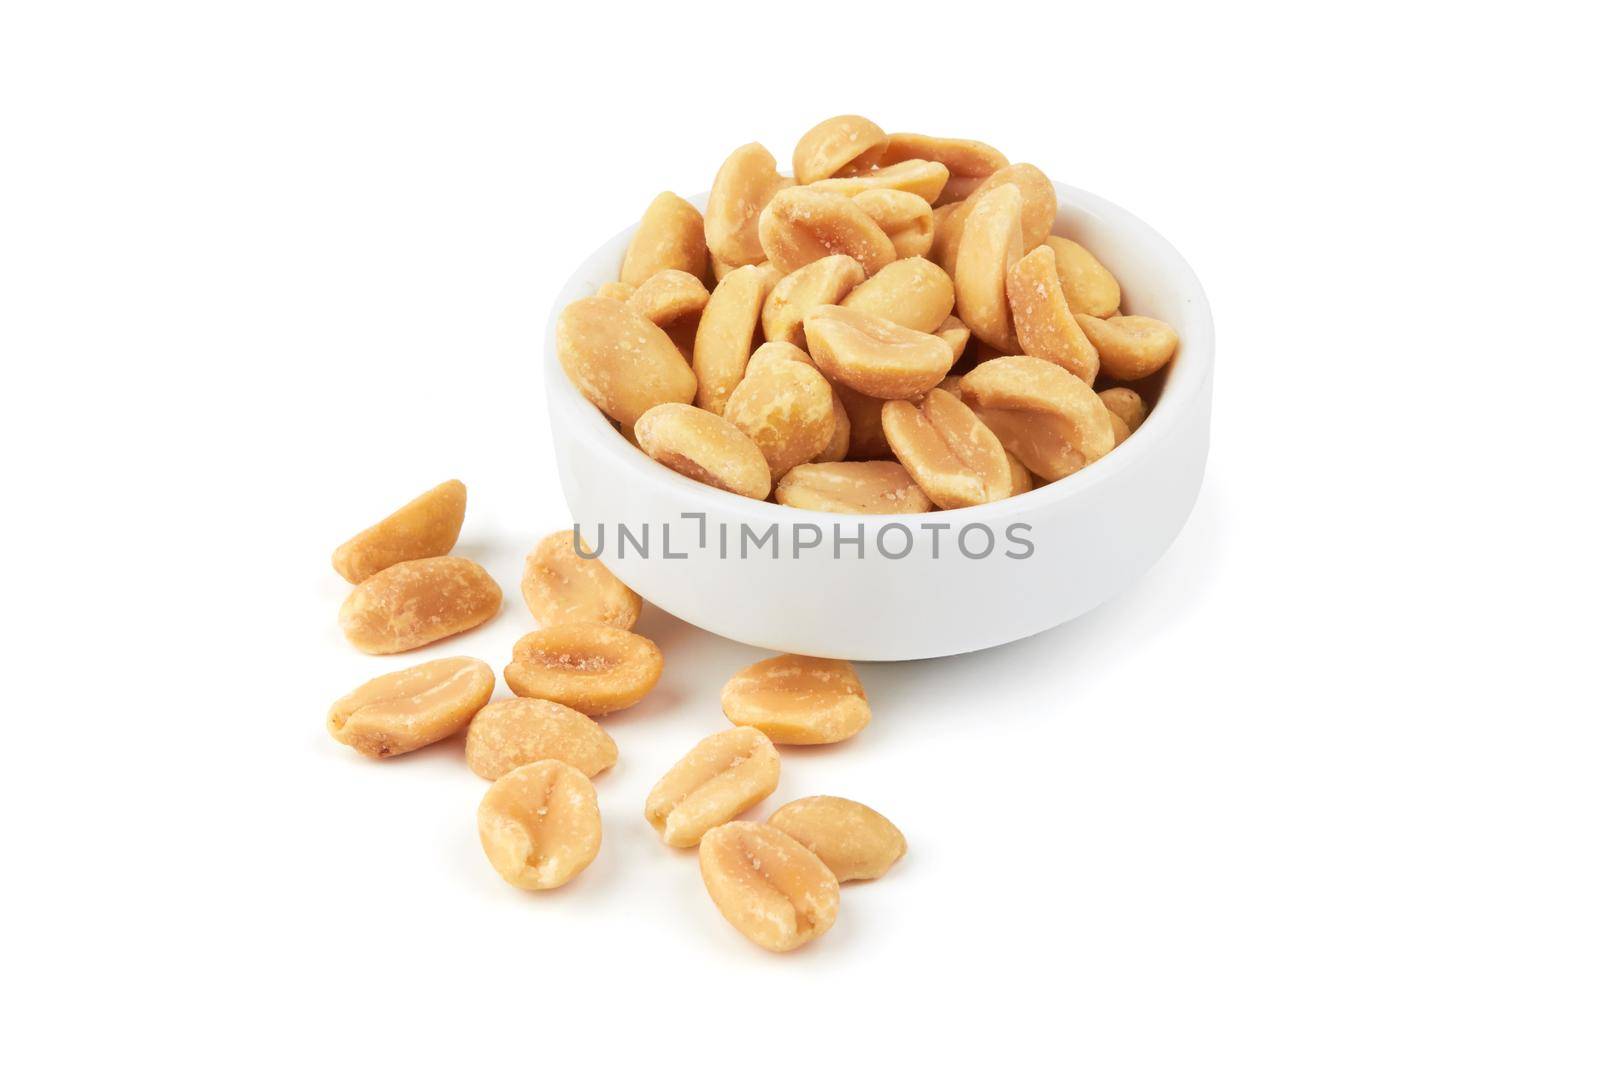 Peanuts in a bowl isolated on a white background